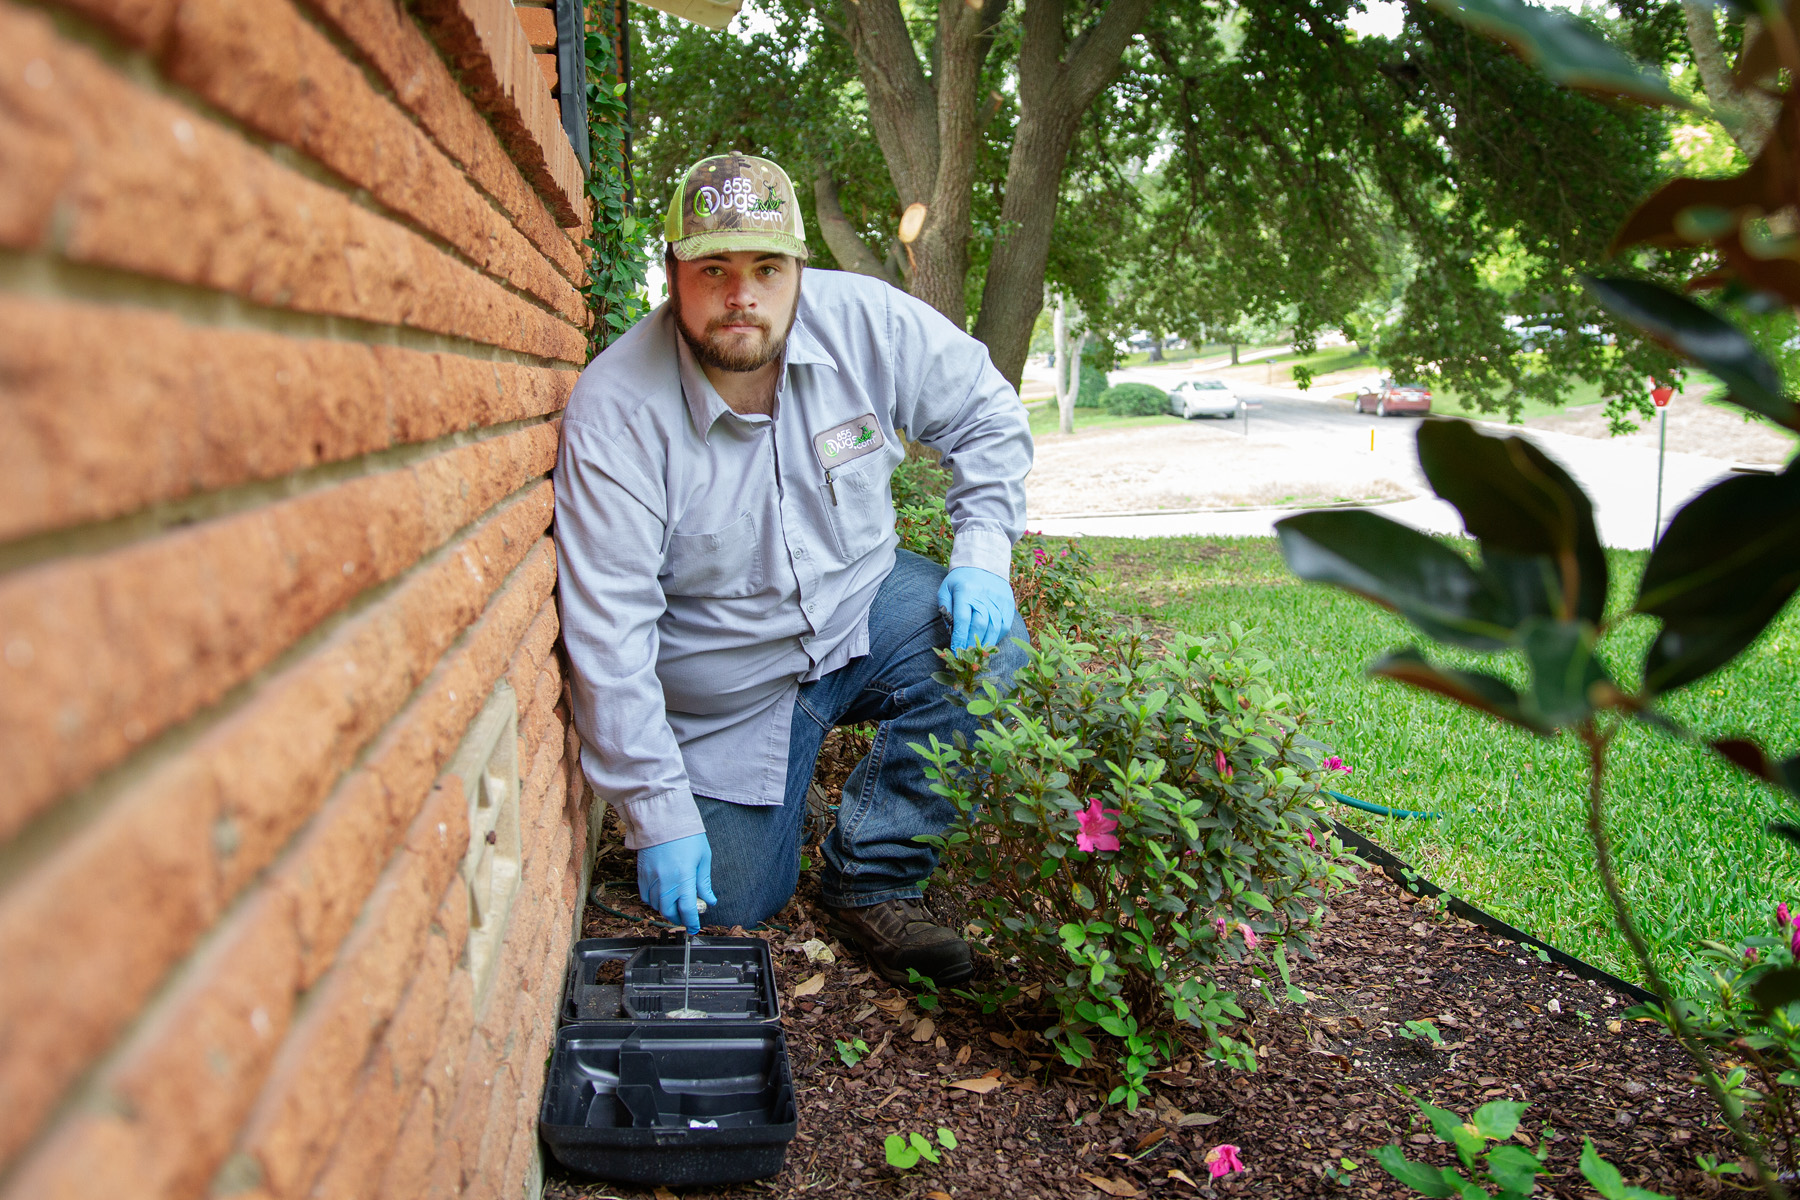 An 855Bugs technician is tending to a bait trap outside a brick home in Waco, Texas.